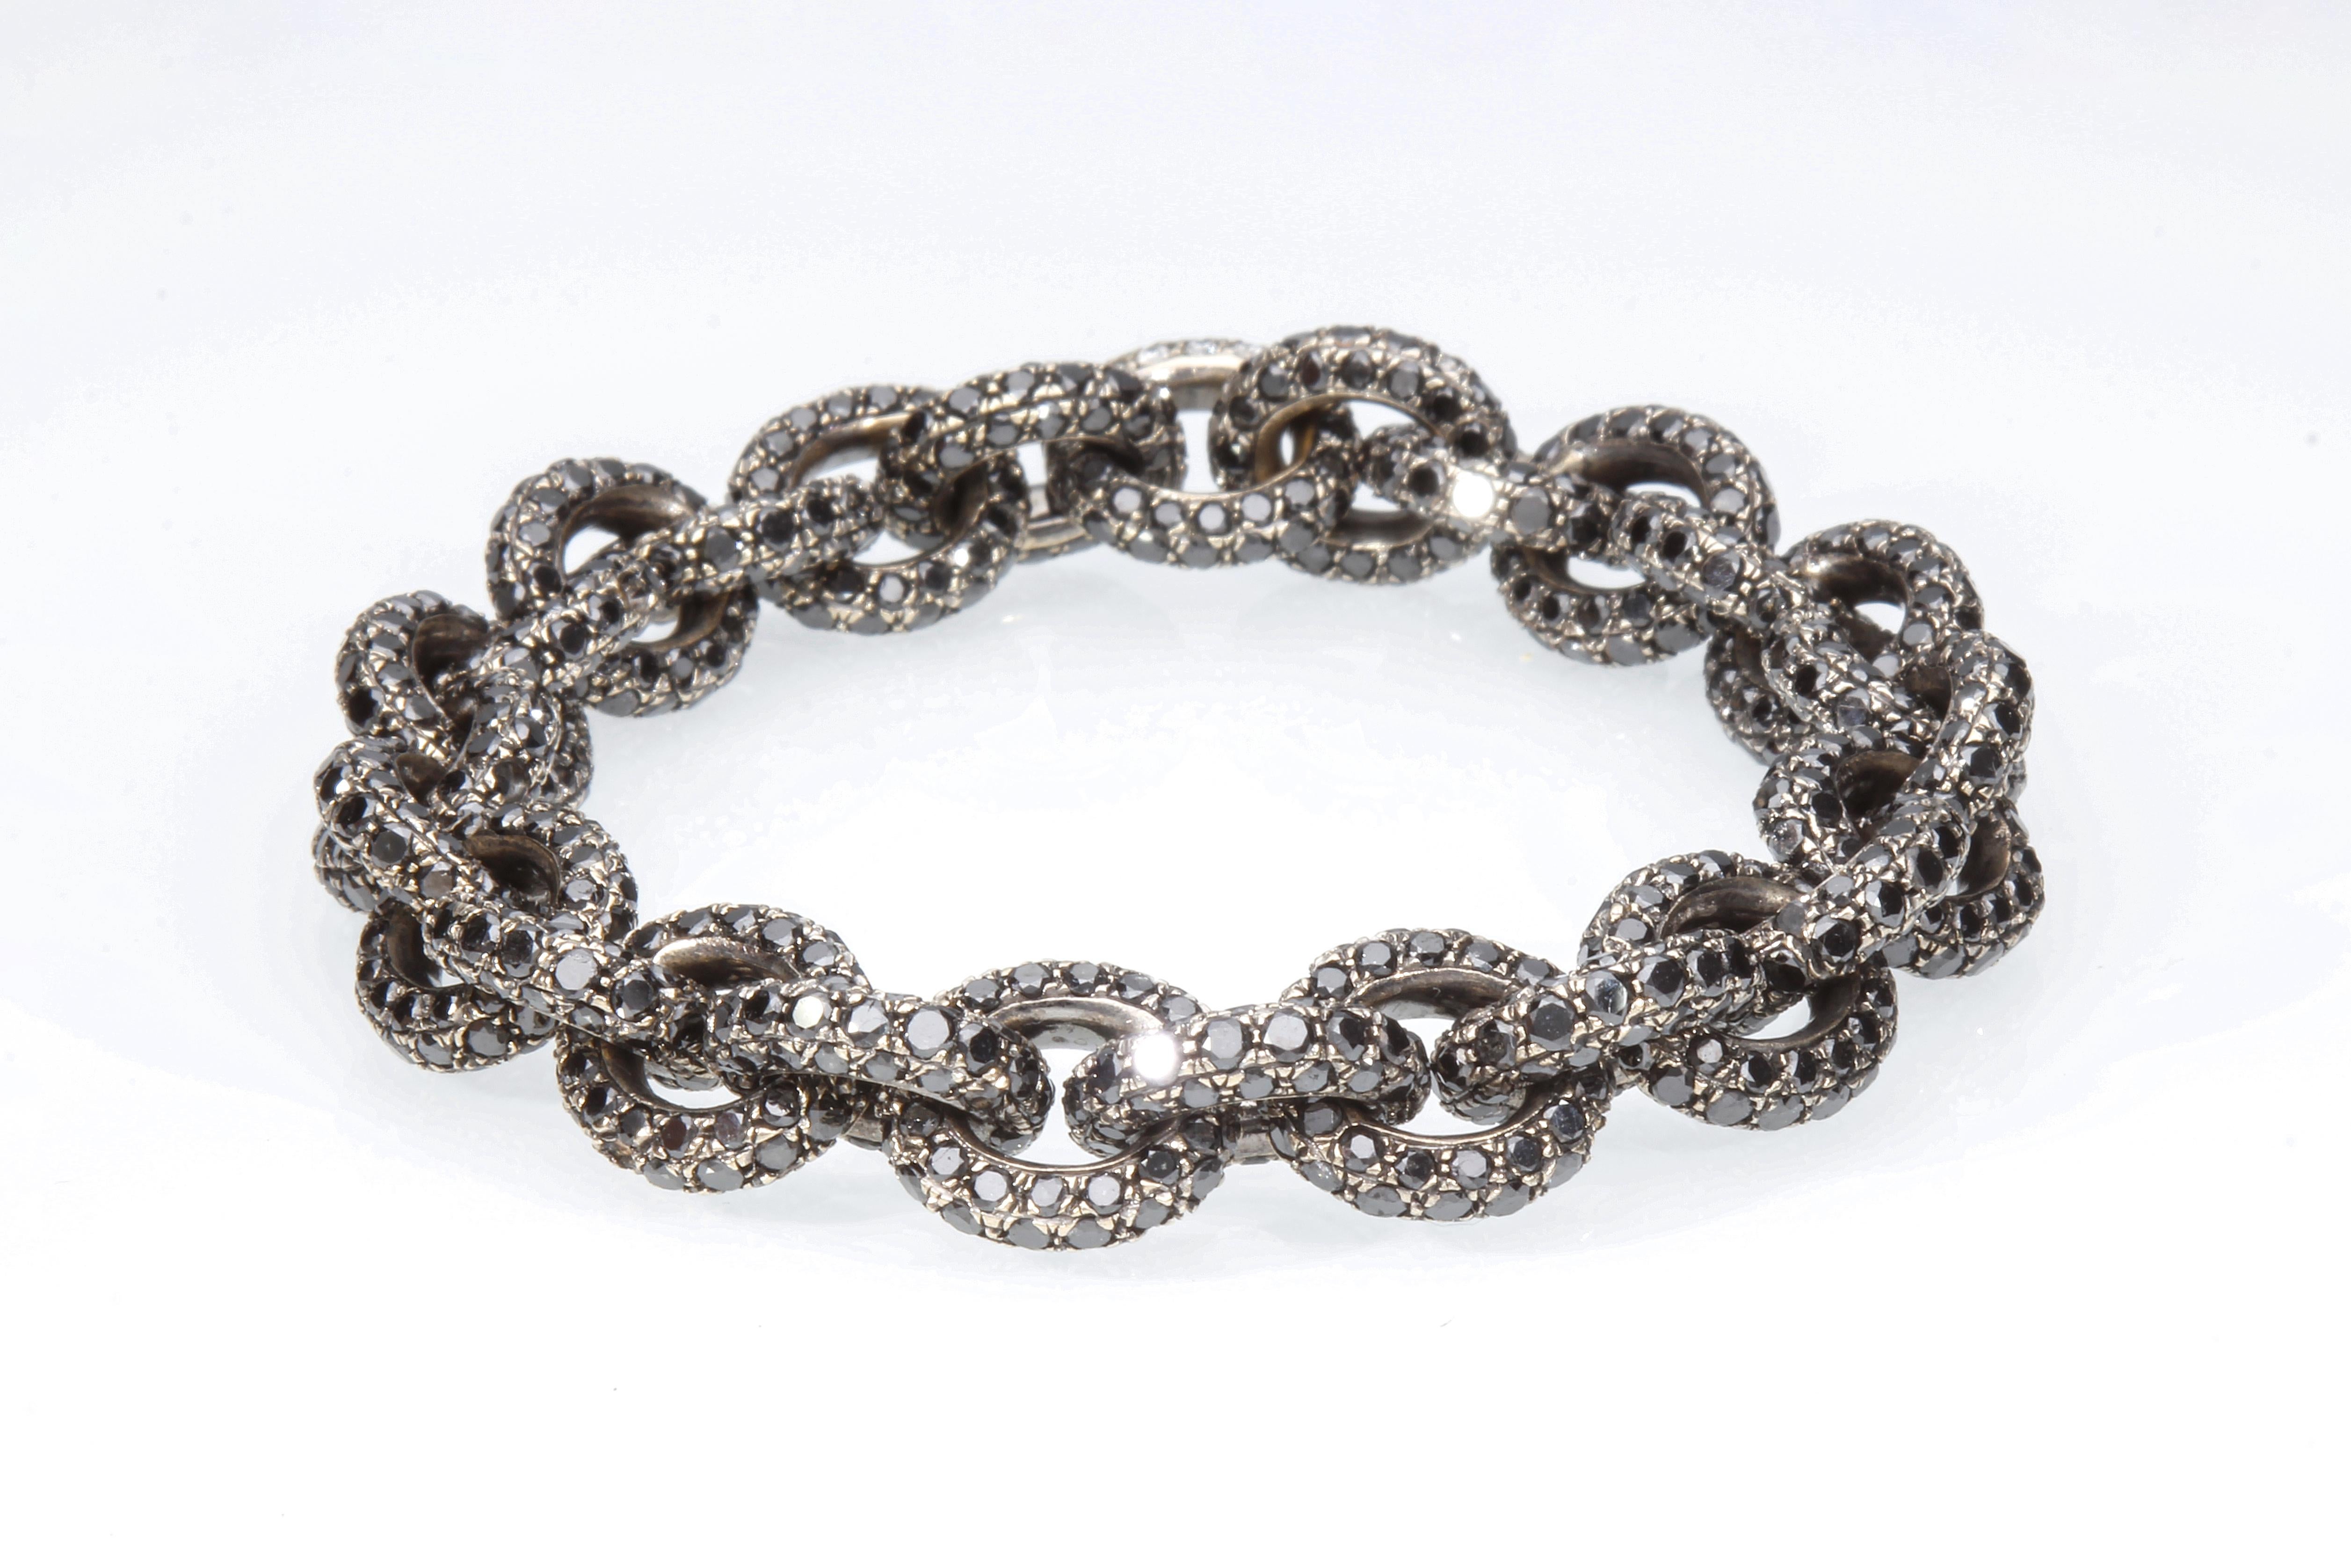 Chain Necklace/Bracelet with 64.26 Ct of White and Black Diamonds. Handmade. For Sale 5